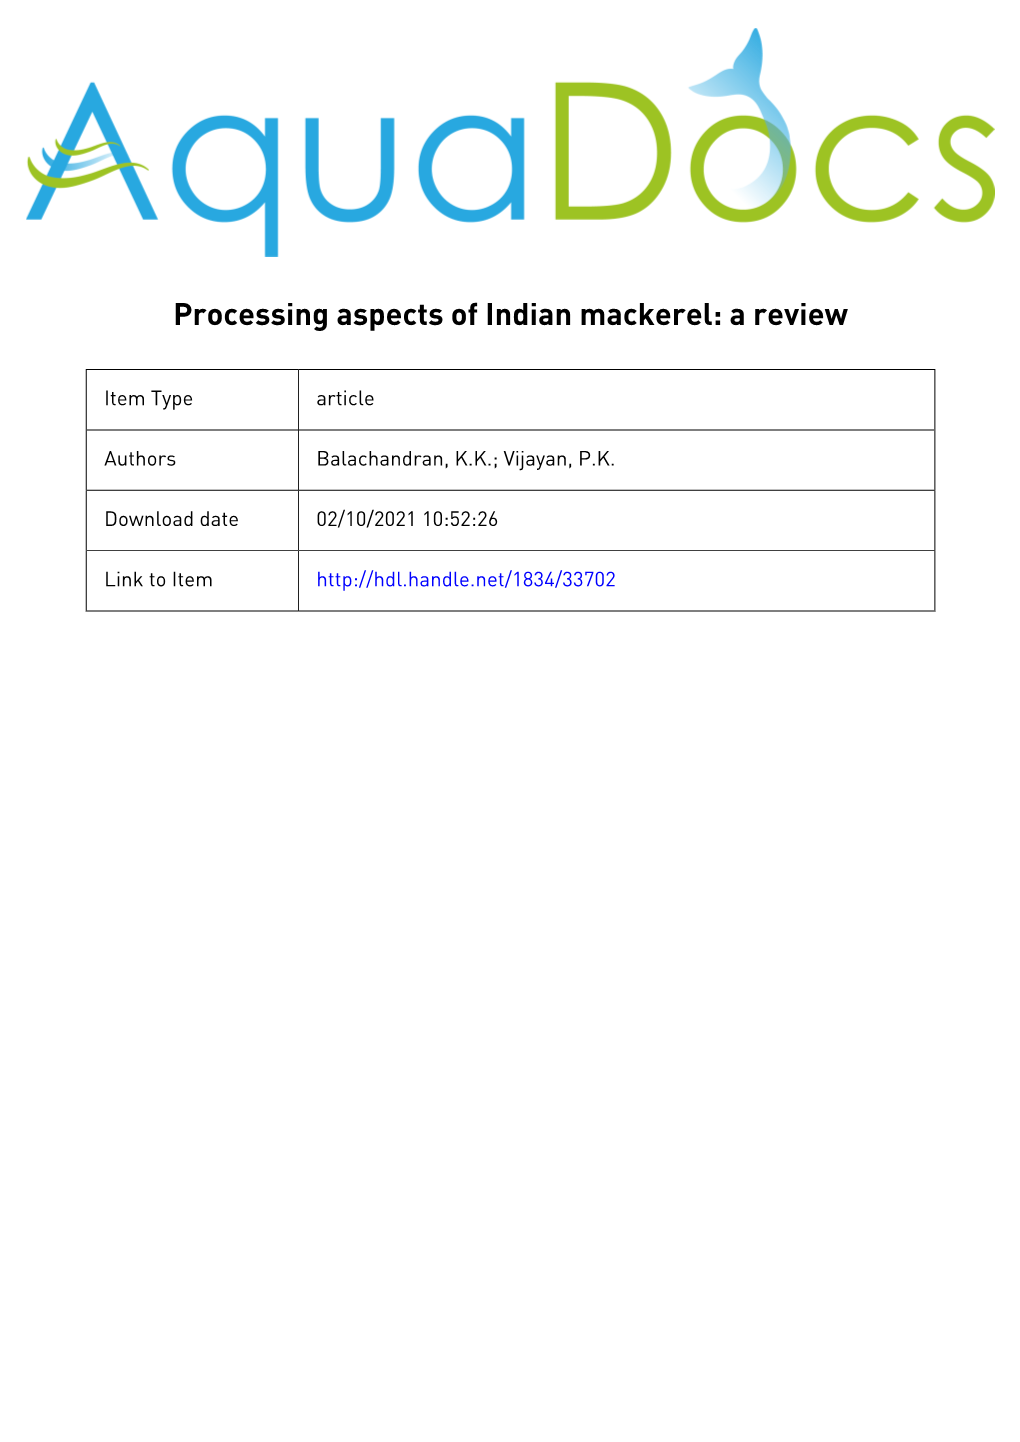 Processing Aspects of Indian Mackerel a Review